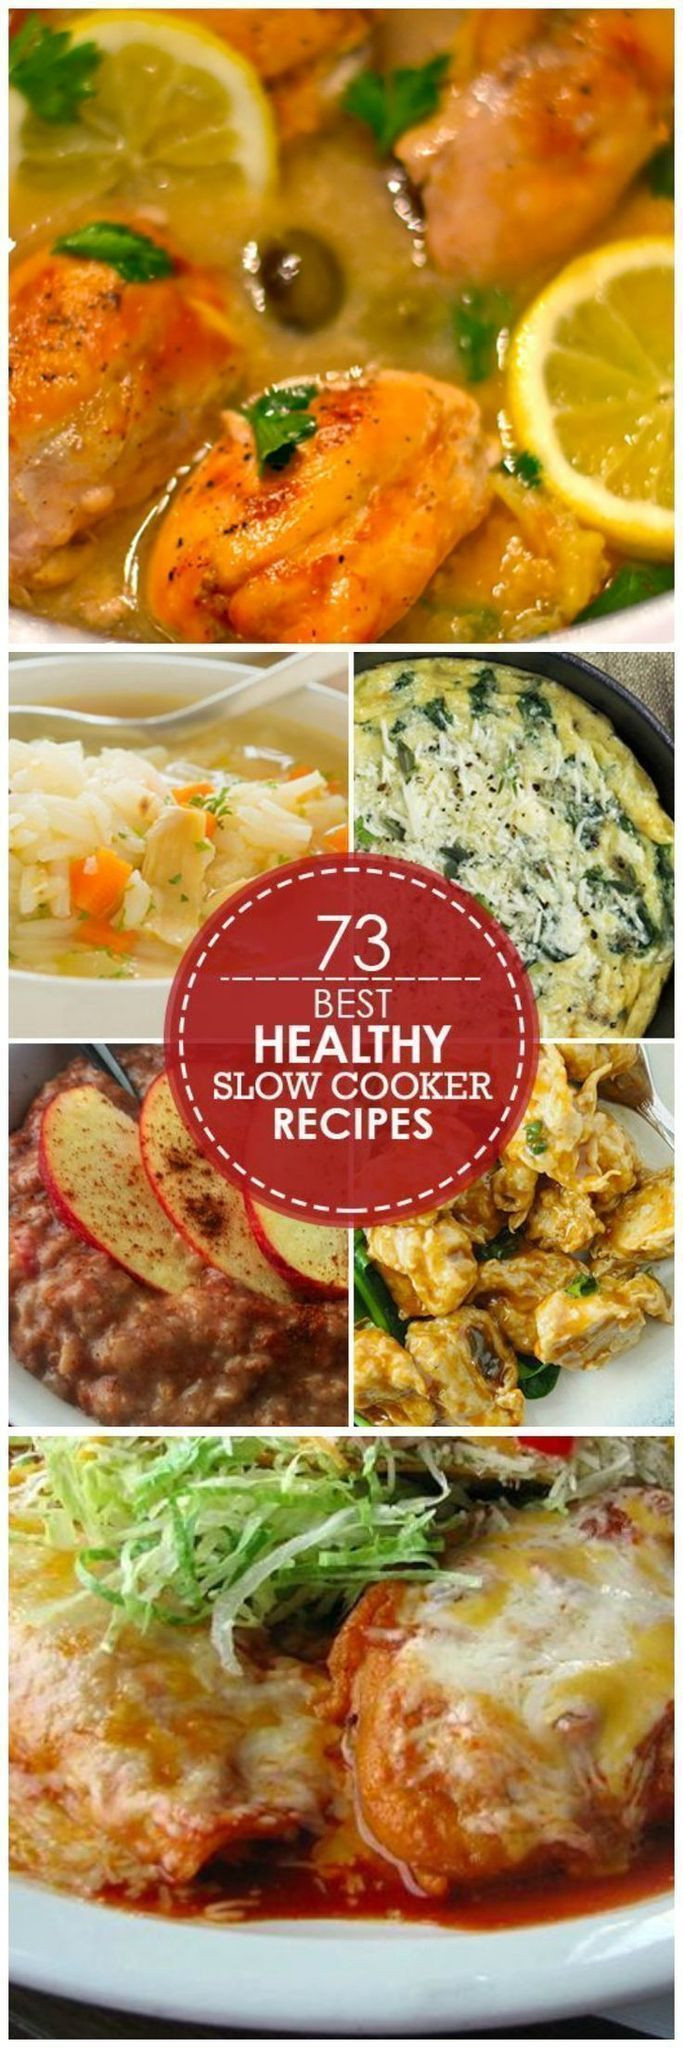 Healthy Slow Cooker Recipes For Two
 100 Best Healthy Recipes on Pinterest